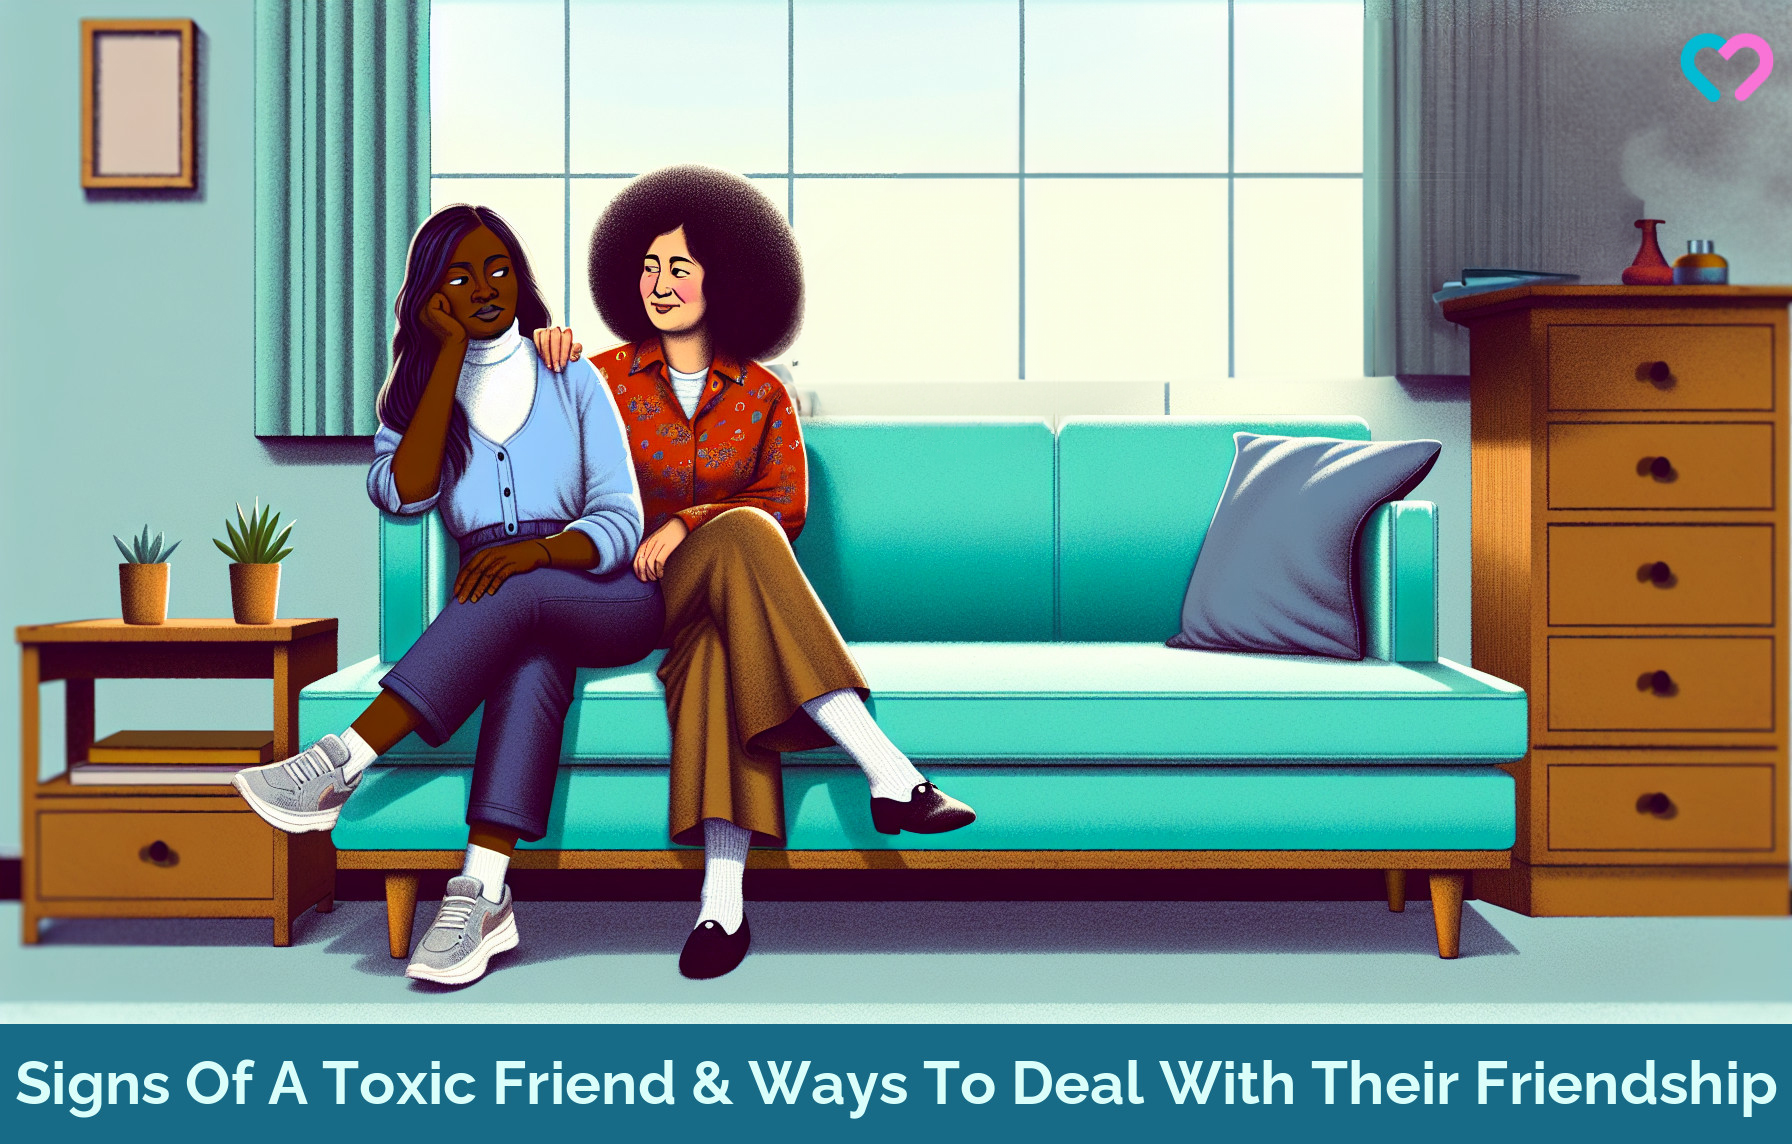 signs of a toxic friendship_illustration